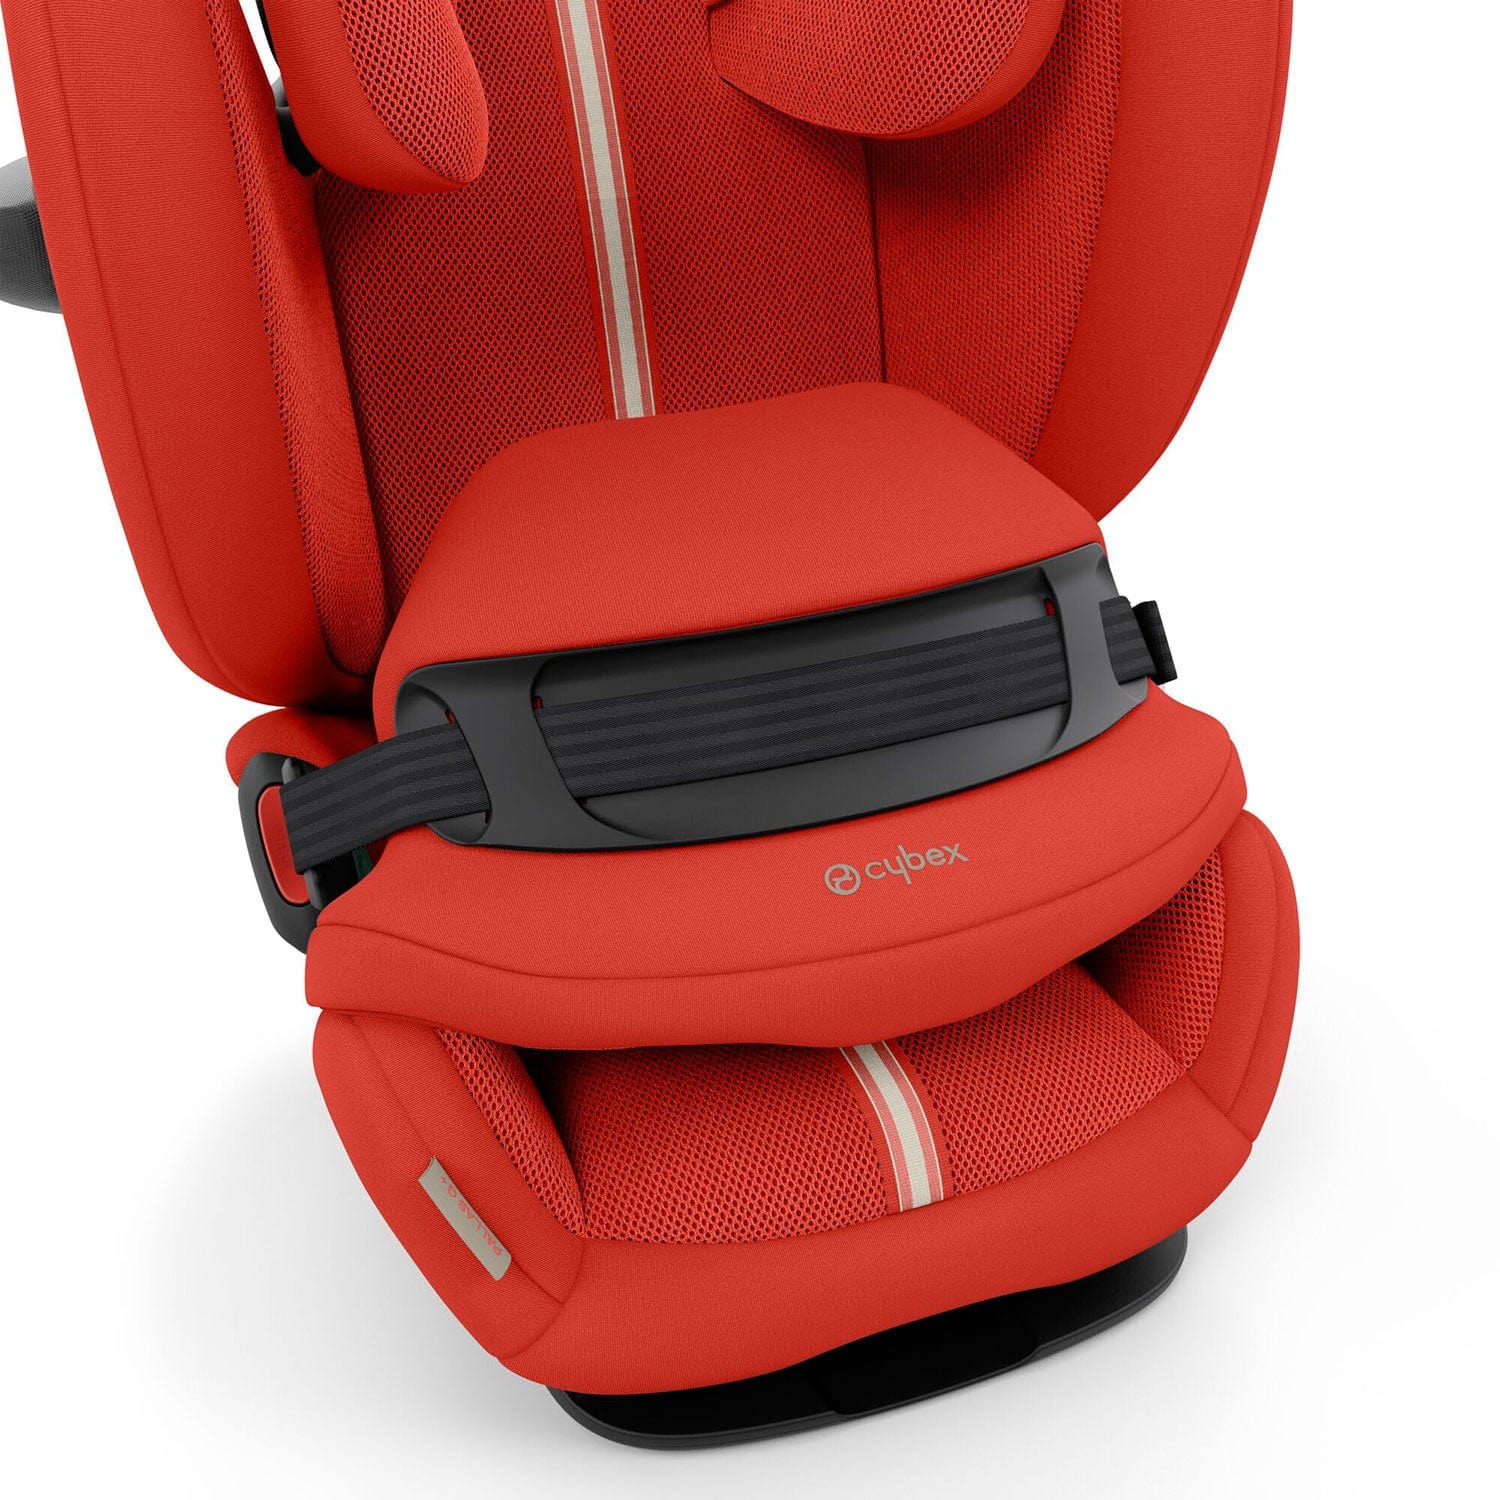 Cybex combination car seats Cybex Pallas G i-Size Plus Car Seat - Hibiscus Red 523001097